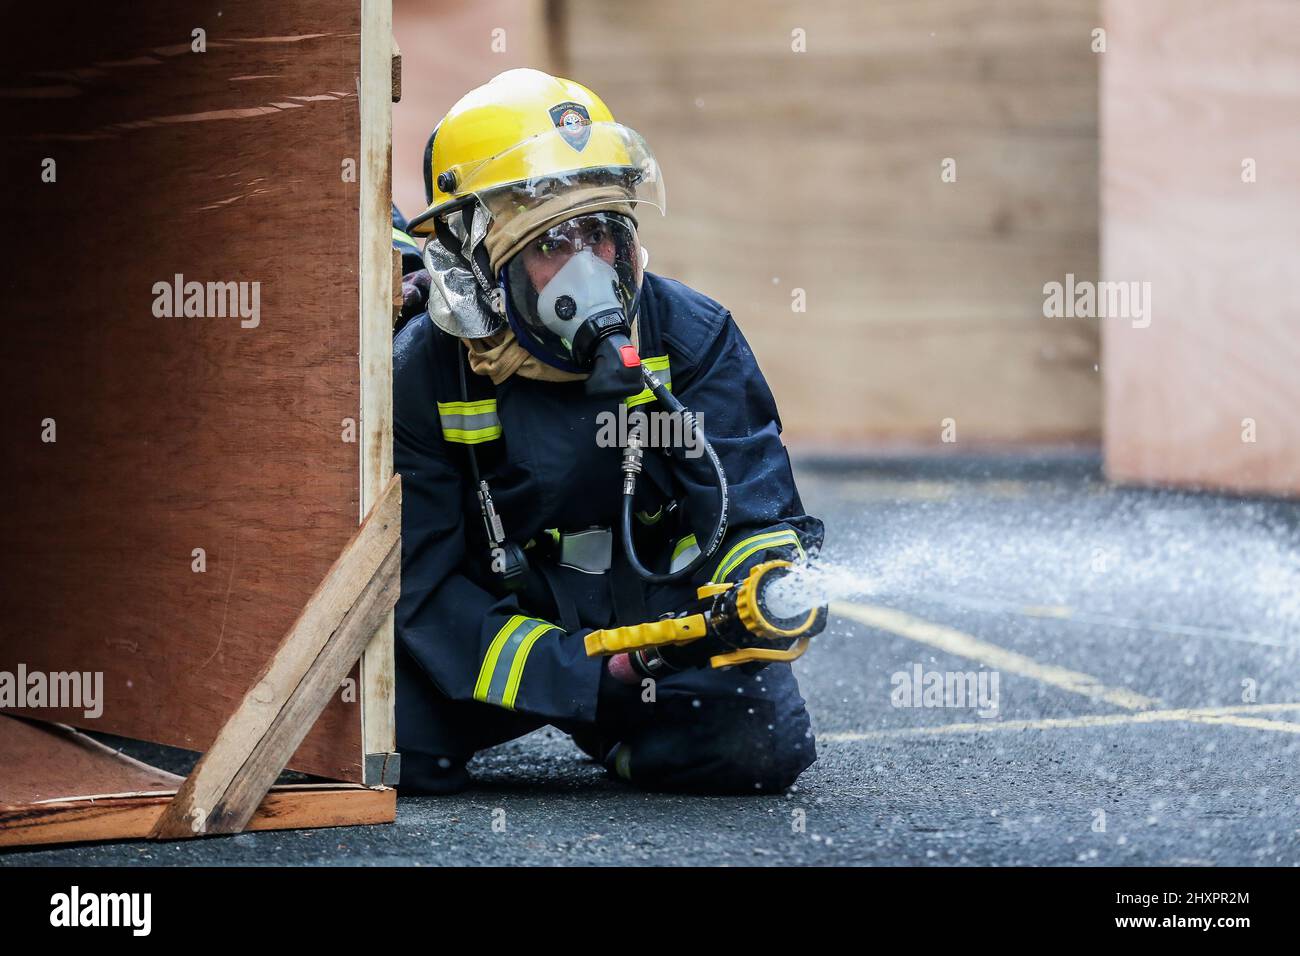 Quezon City. 14th Mar, 2022. A female firefighter participates in the Women Firefighters Skills Olympics at the Philippine Bureau of Fire Protection-National Capital Region (BFP-NCR) headquarters in Quezon City, the Philippines on March 14, 2022. The Philippine Bureau of Fire Protection (BFP) held its Women Firefighters Skills Olympics as part of the observance of the National Women's Month and the Fire Prevention Month to show the skills of their female personnel in extinguishing fires, emergency response, and rescue capabilities. Credit: Rouelle Umali/Xinhua/Alamy Live News Stock Photo